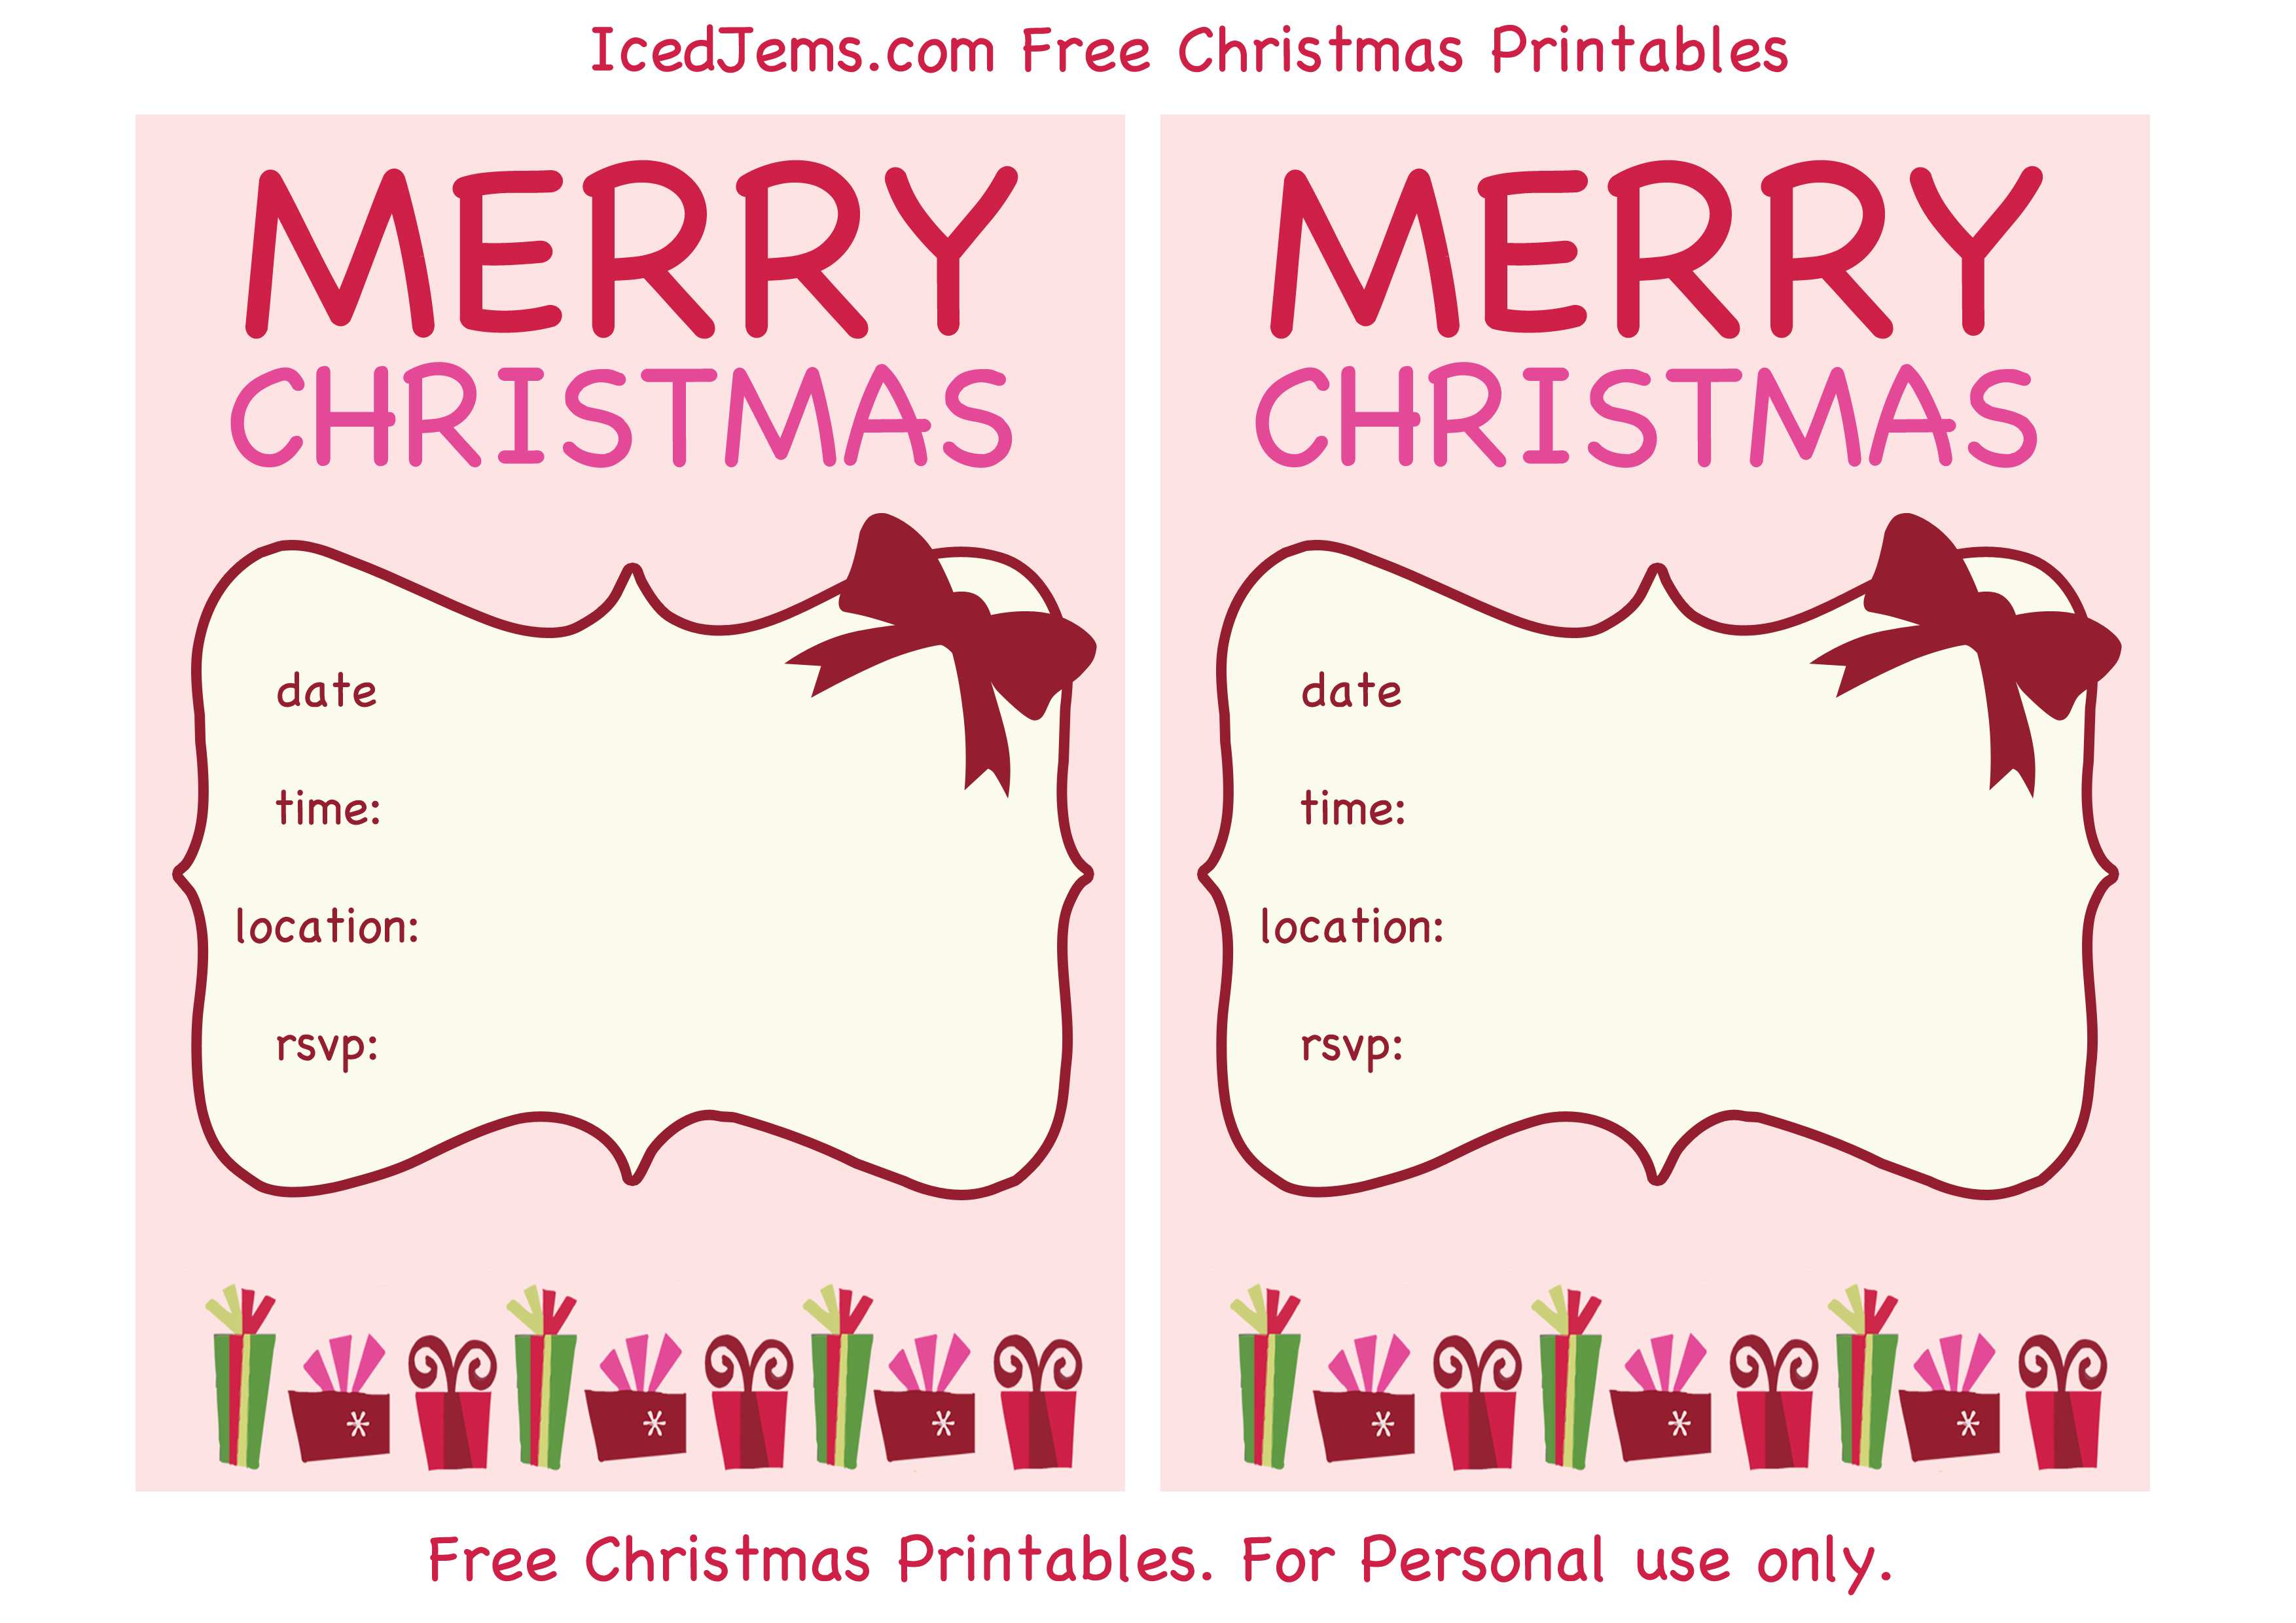 24 Free Printable Christmas Invitation Card Template Free Download in Photoshop for Christmas Invitation Card Template Free Download